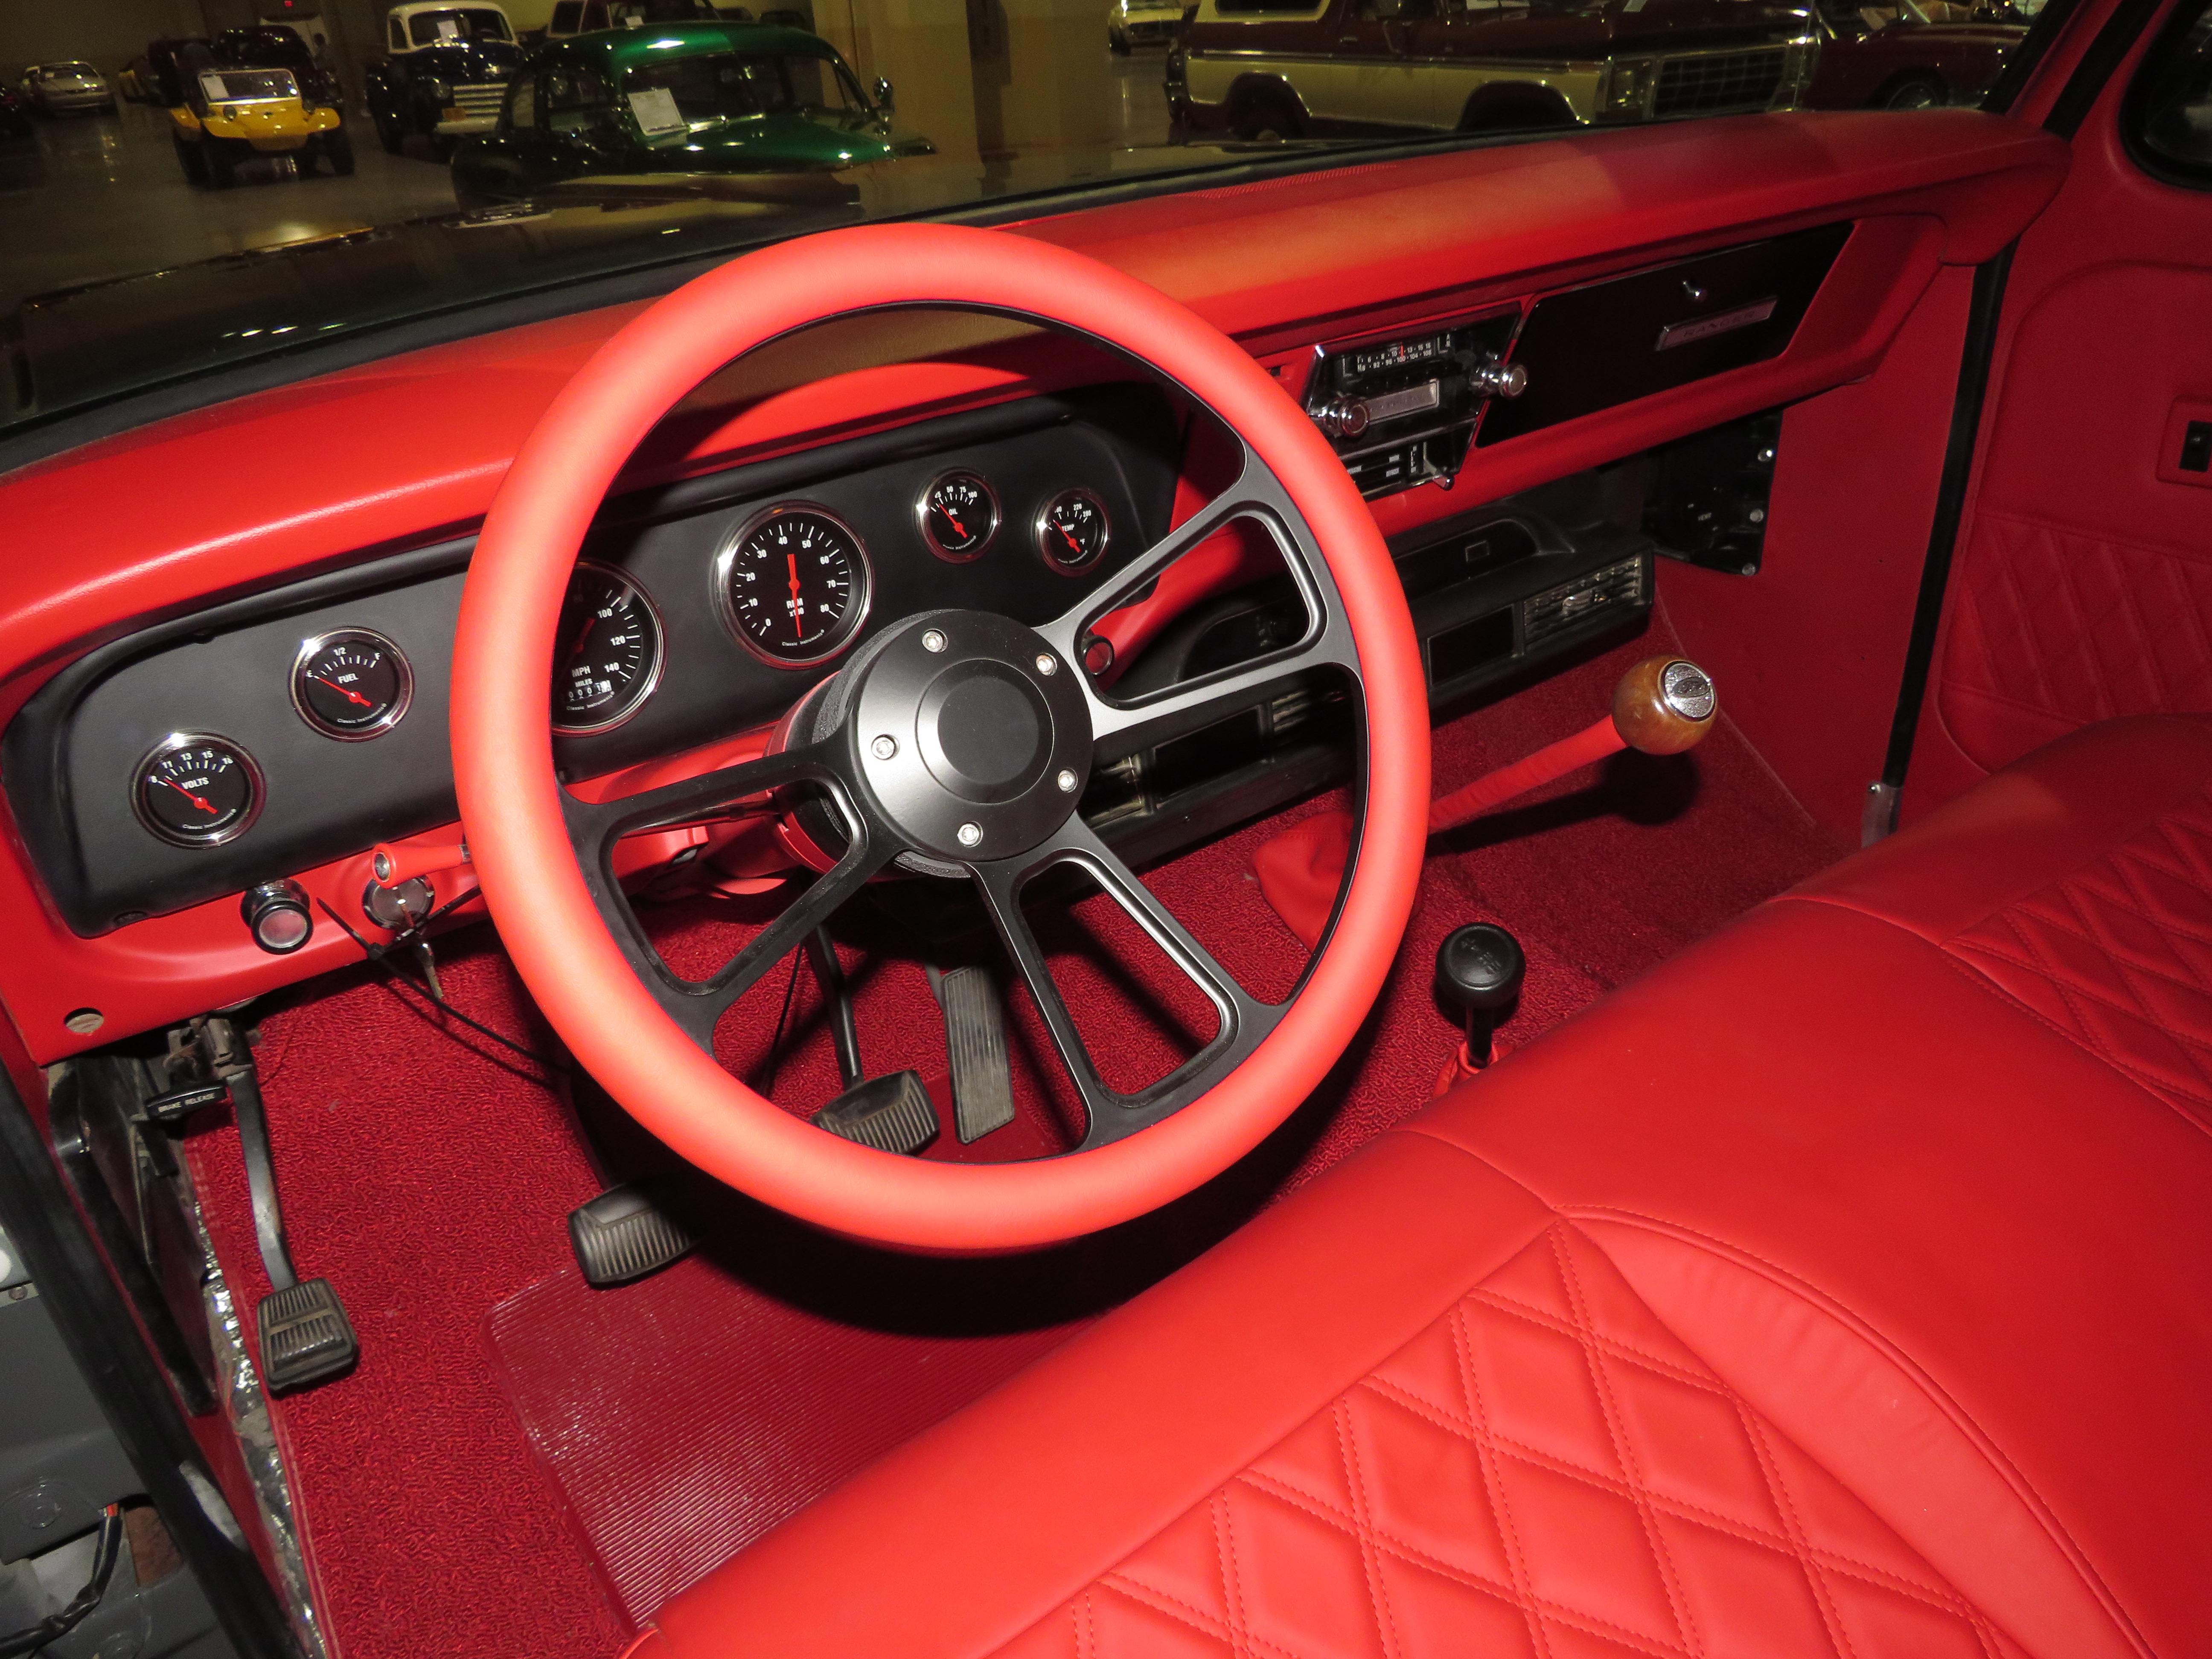 7th Image of a 1971 FORD F100